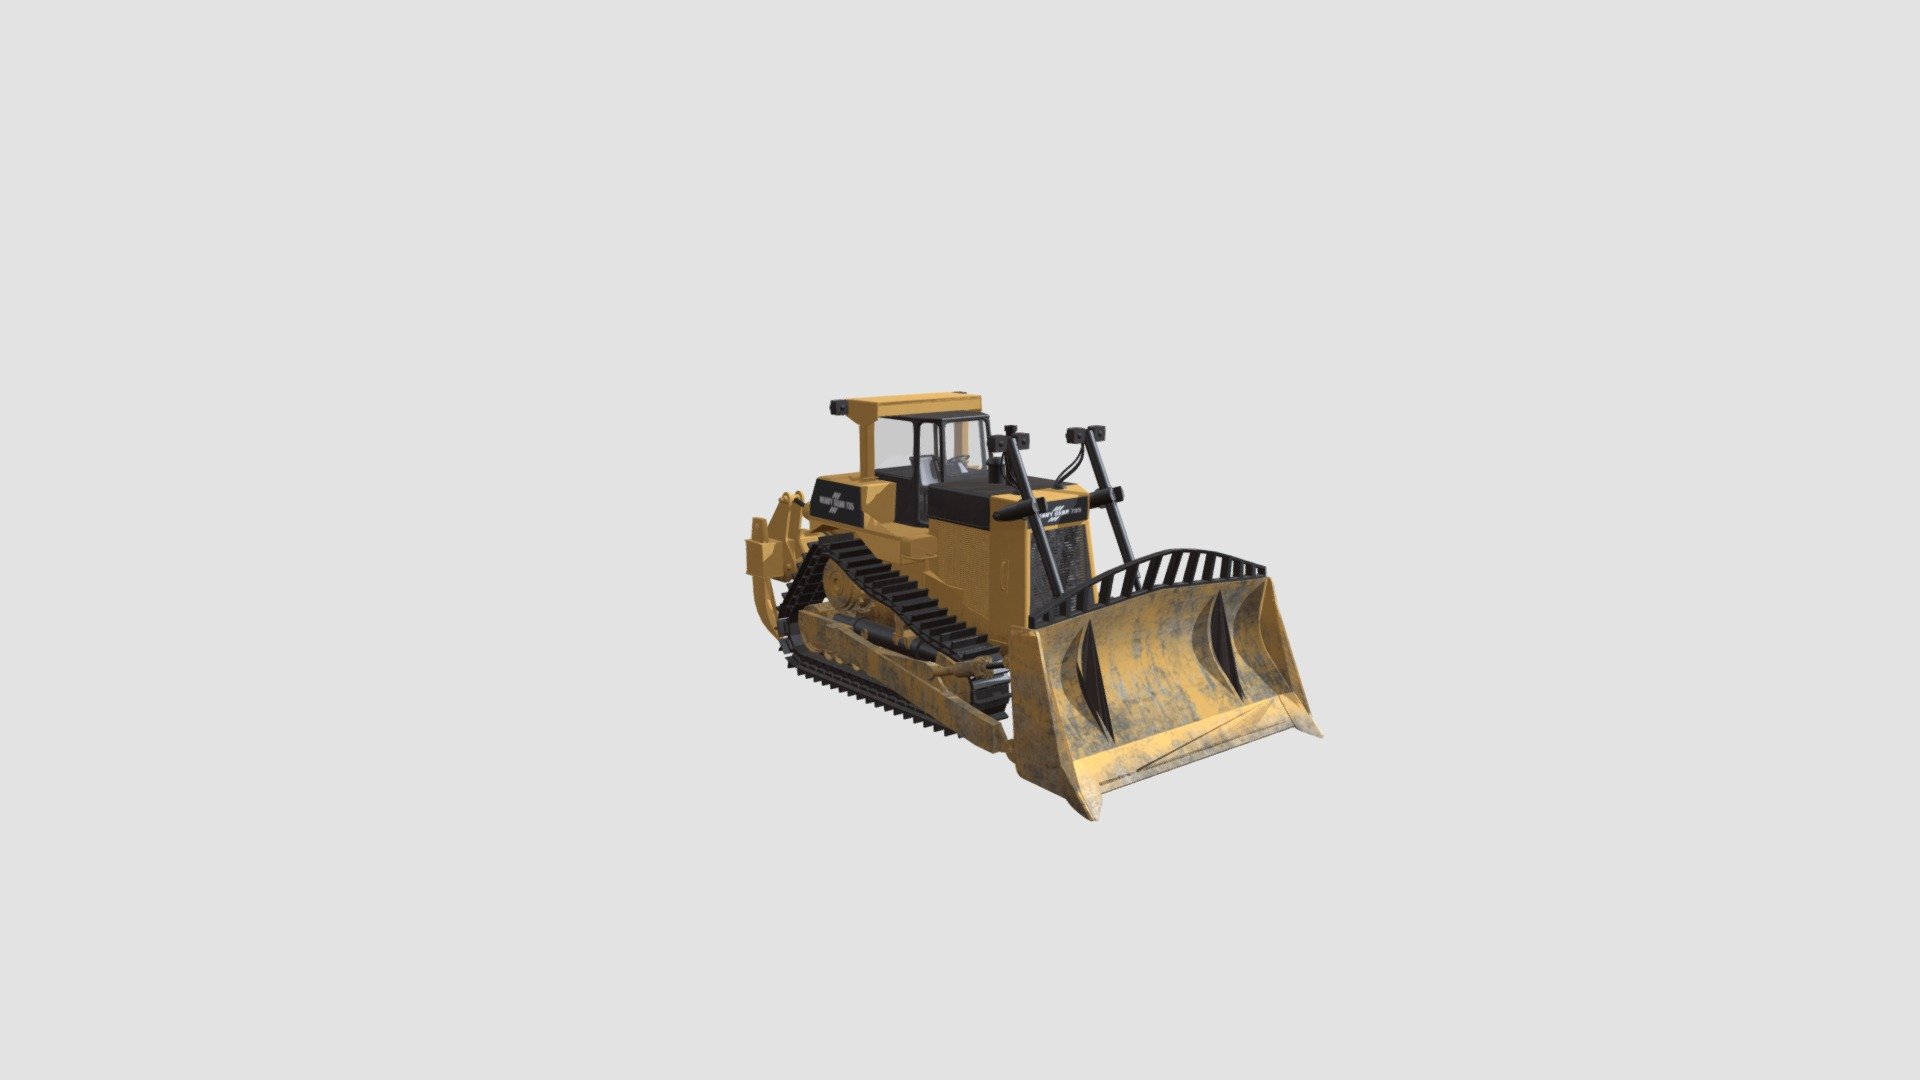 Highly detailed 3d model of bulldozer with textures, shaders and materials. It is ready to use, just put it into your scene 3d model